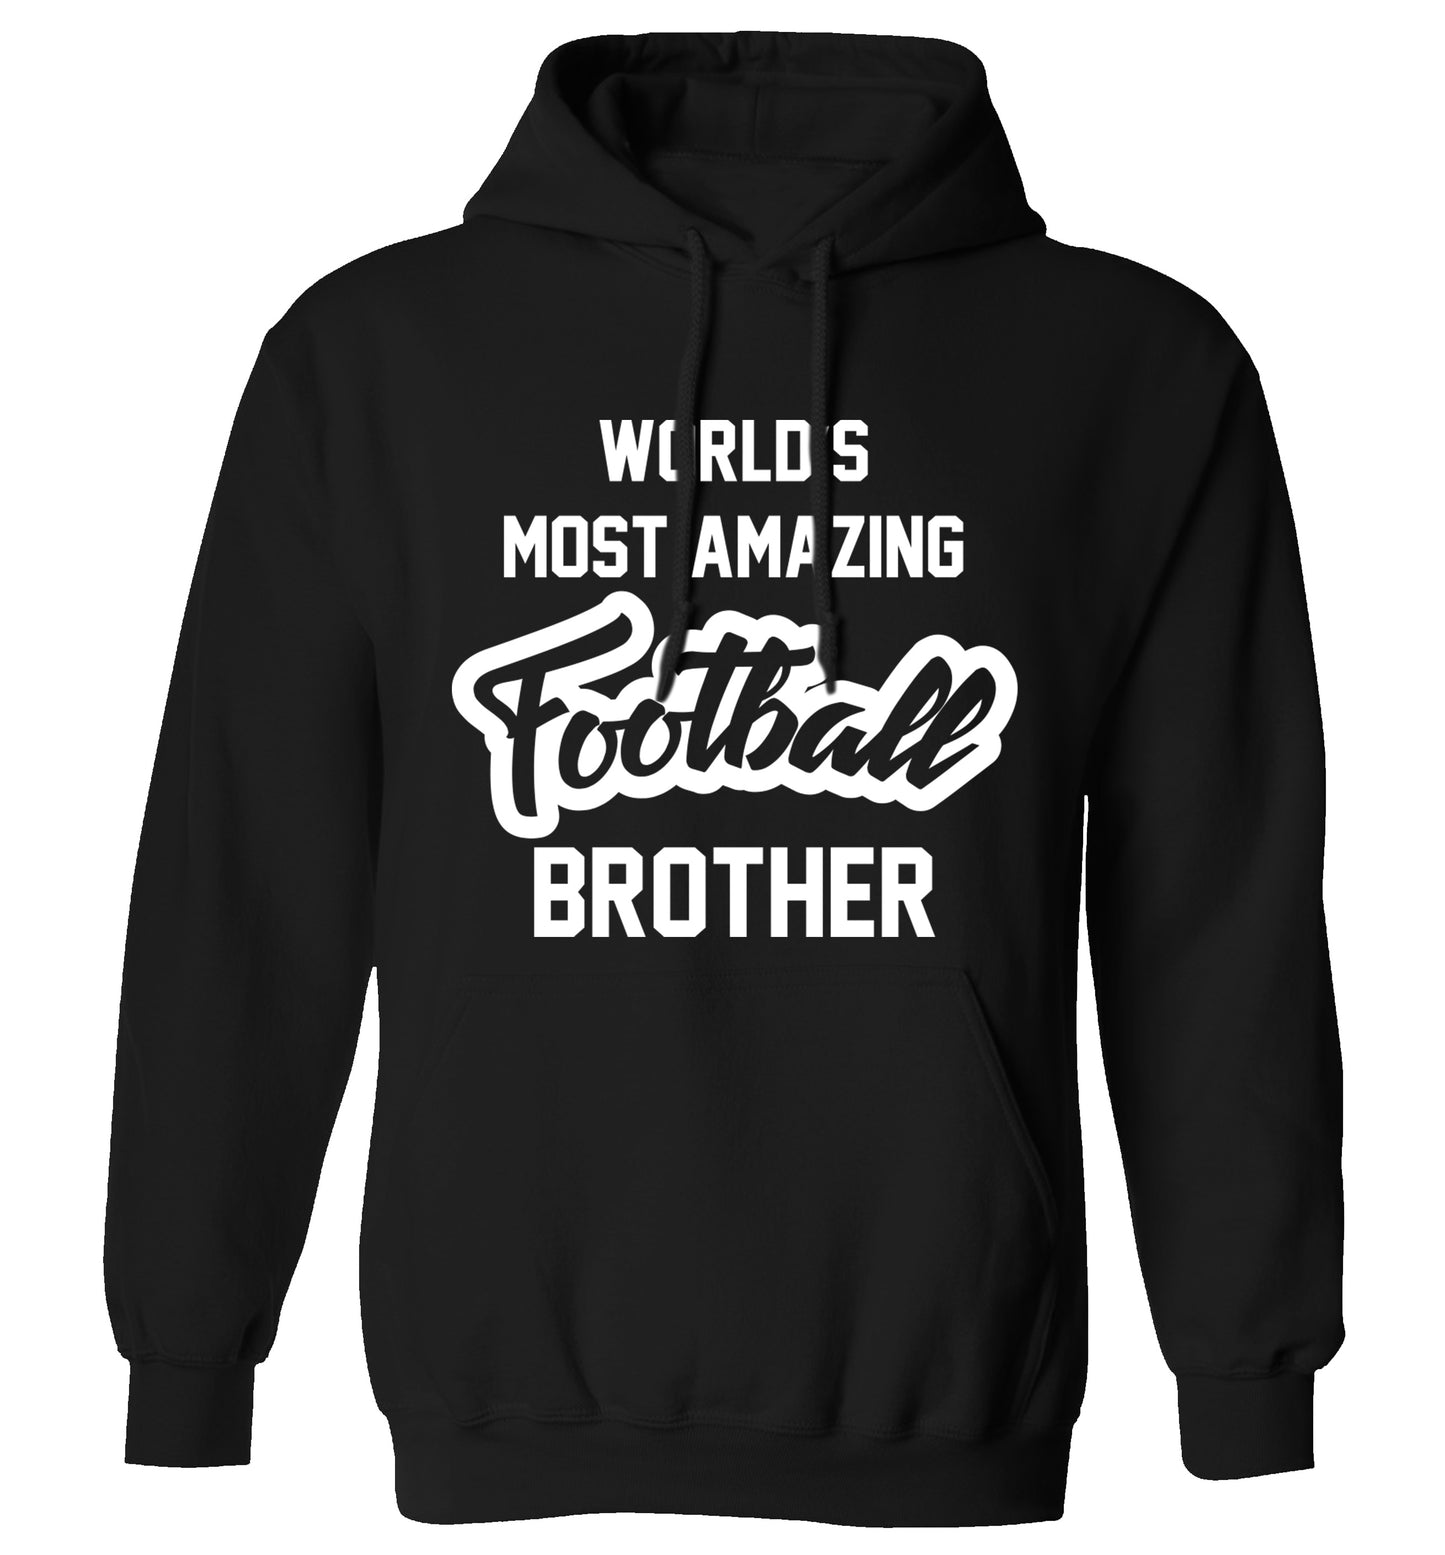 Worlds most amazing football brother adults unisexblack hoodie 2XL